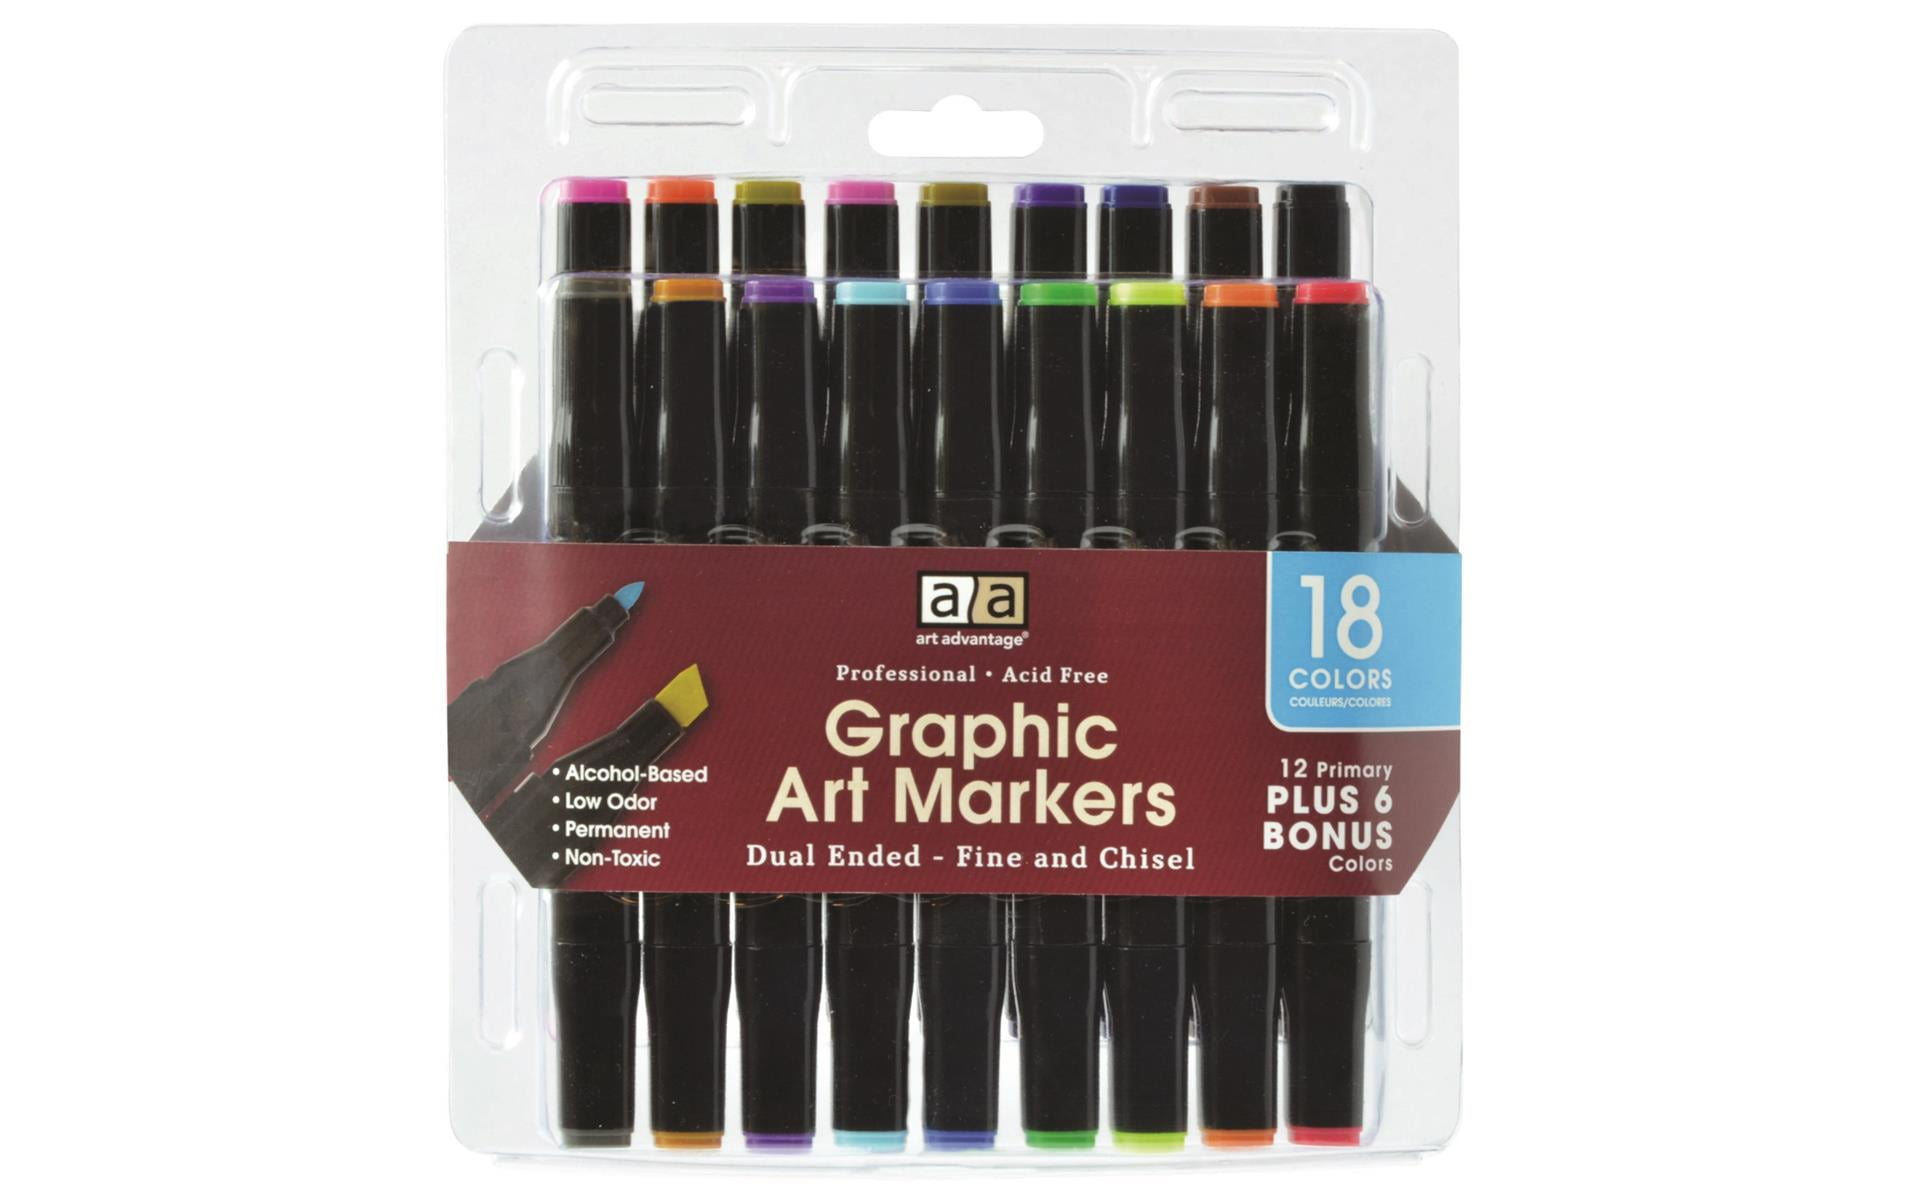 Thornton's Art Supply Premium Colorless Blender Pencil 12 Count Wax Based for Drawing Sketching Blending Shading Softening Artwork